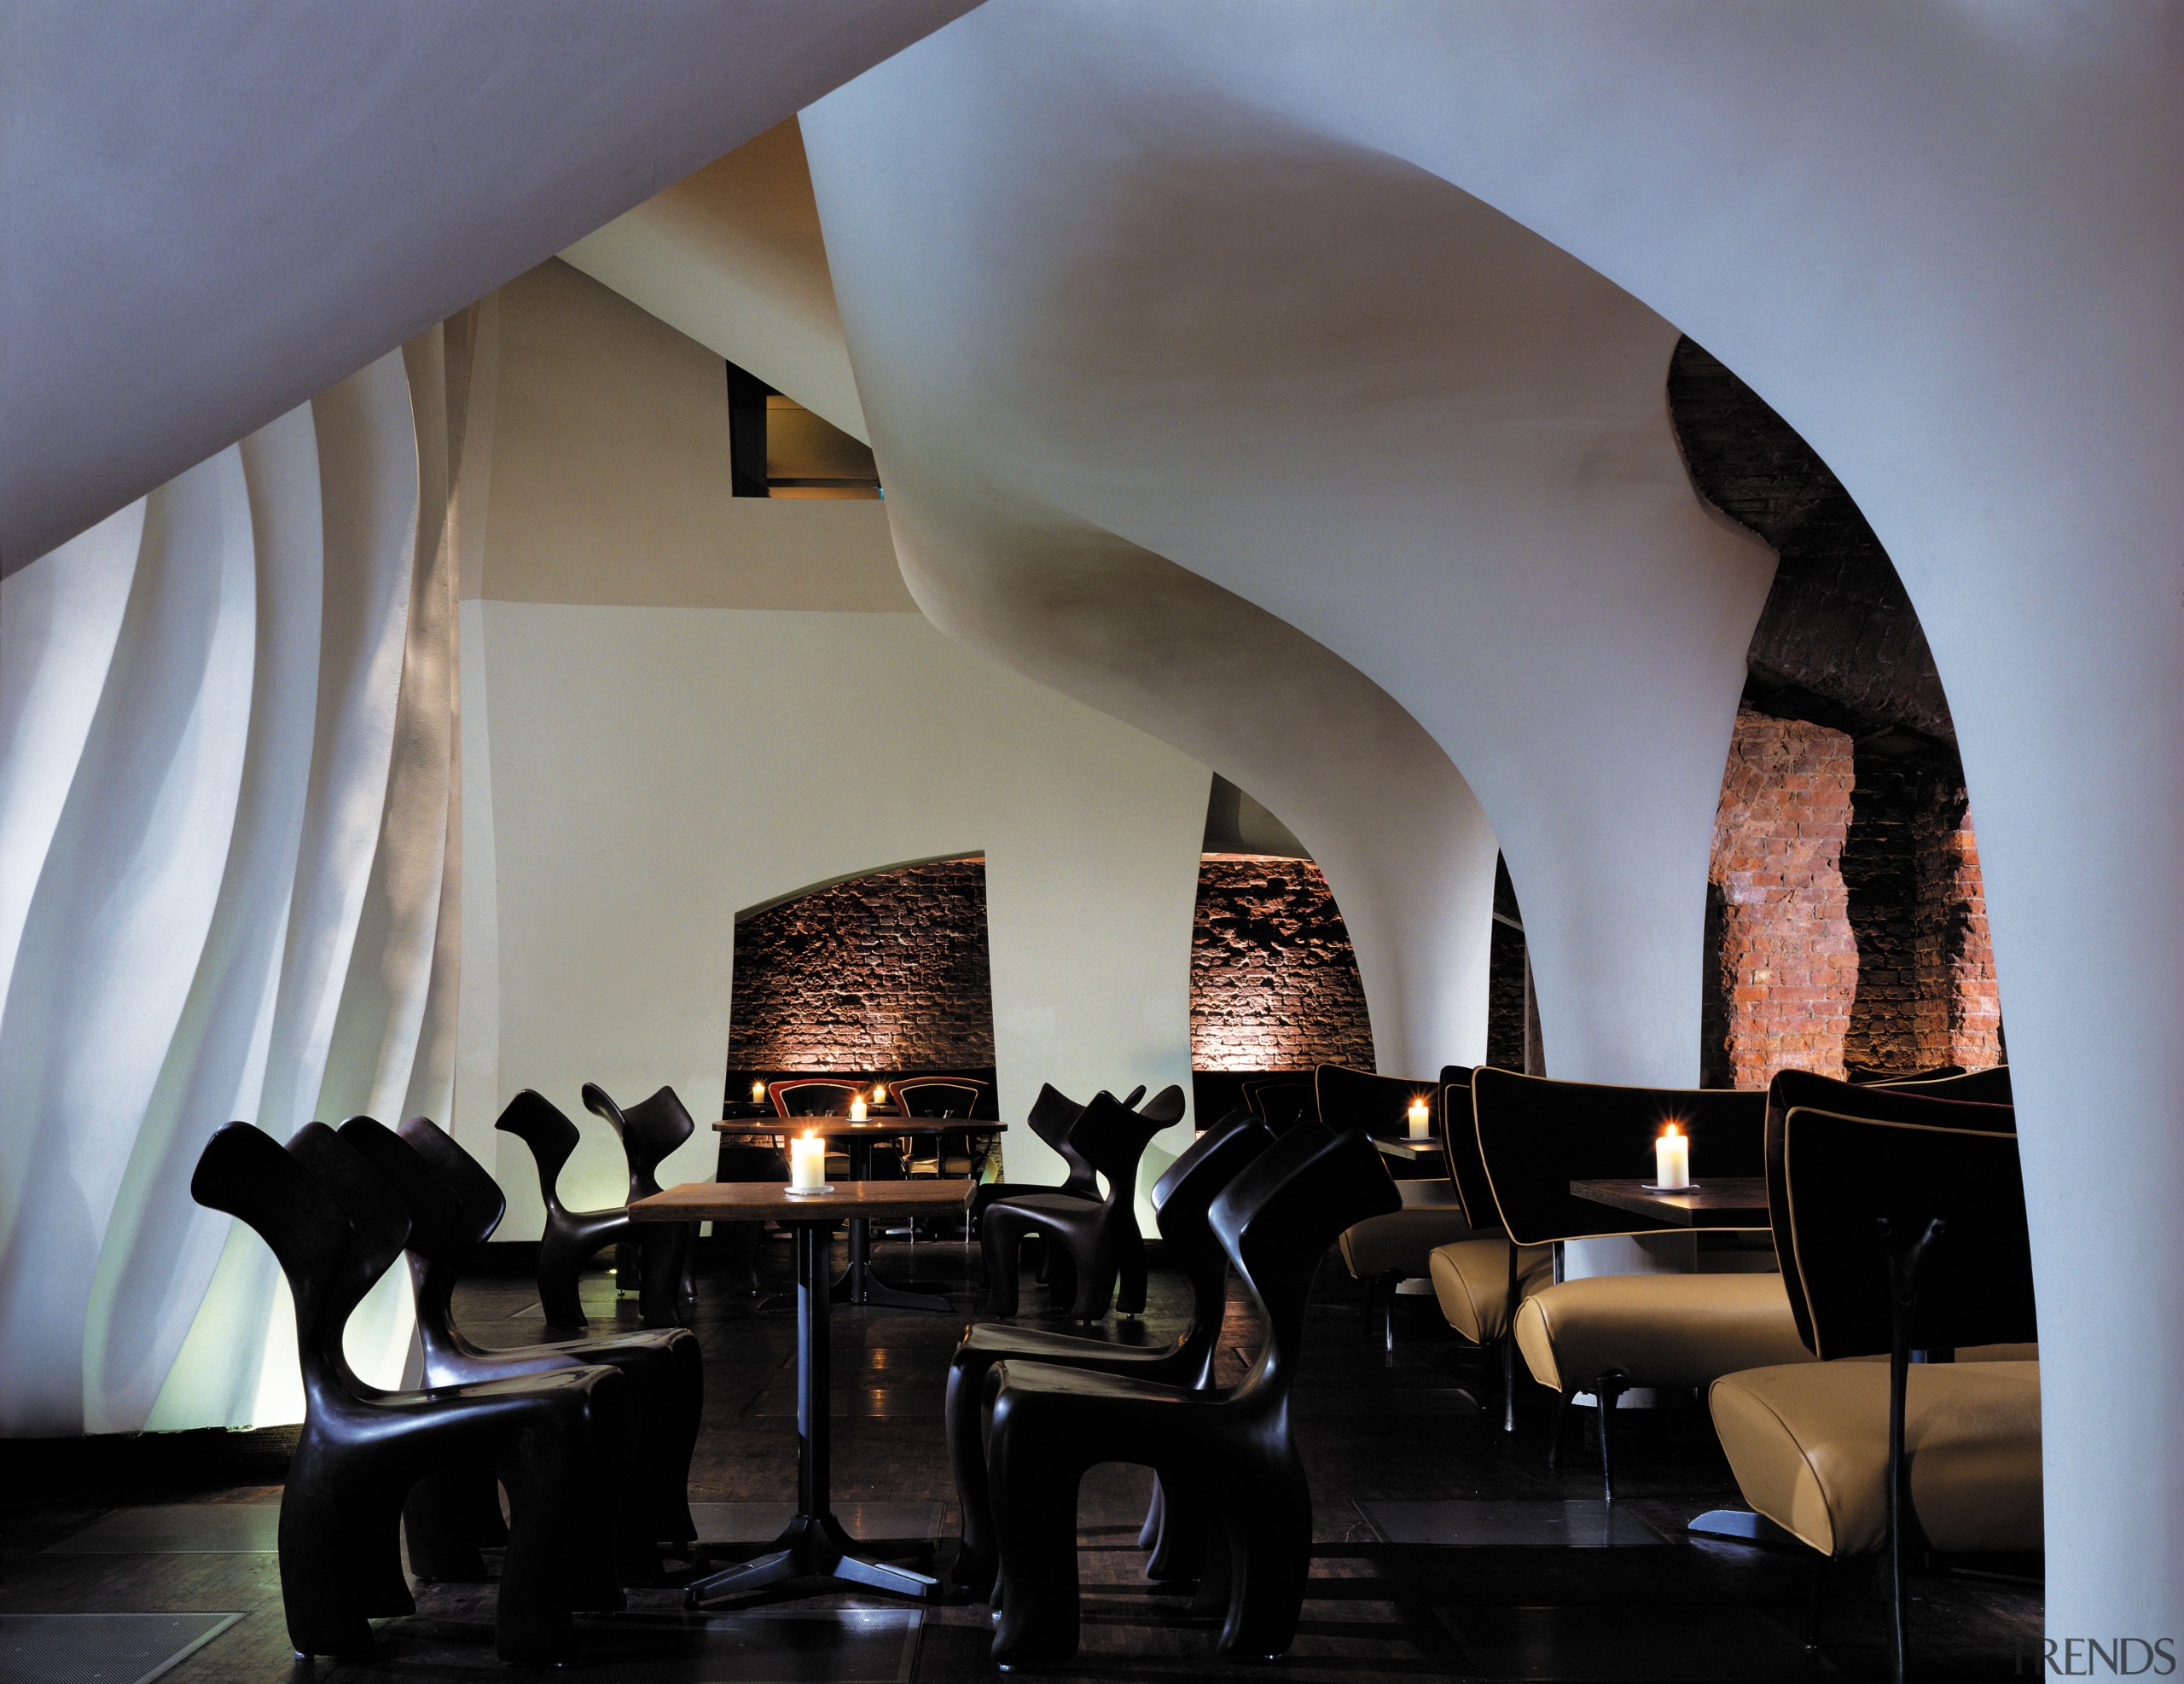 view of the restaurant that was designed and architecture, furniture, hearth, interior design, table, gray, black